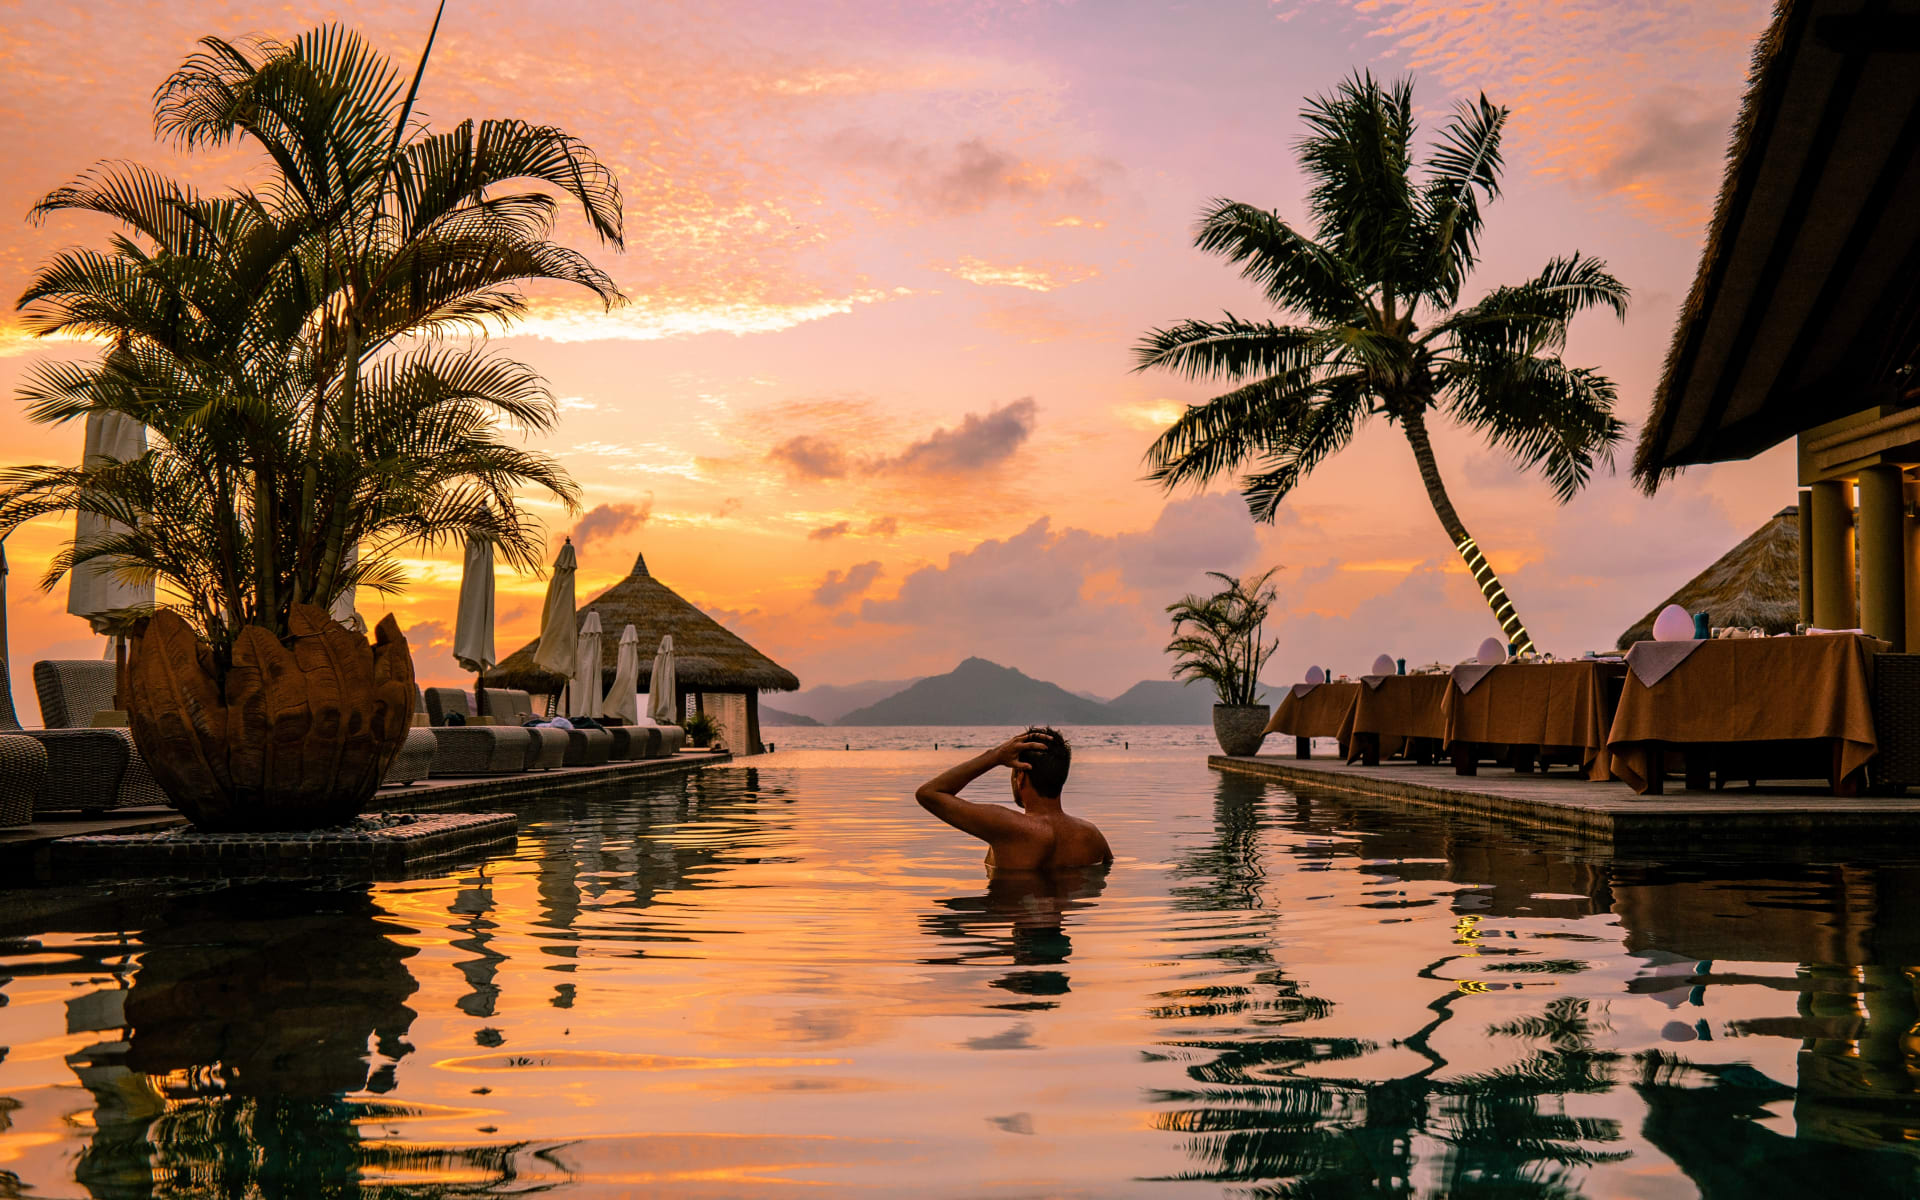 A man bathes in an outdoor infinity pool ahead of a pink sunset.